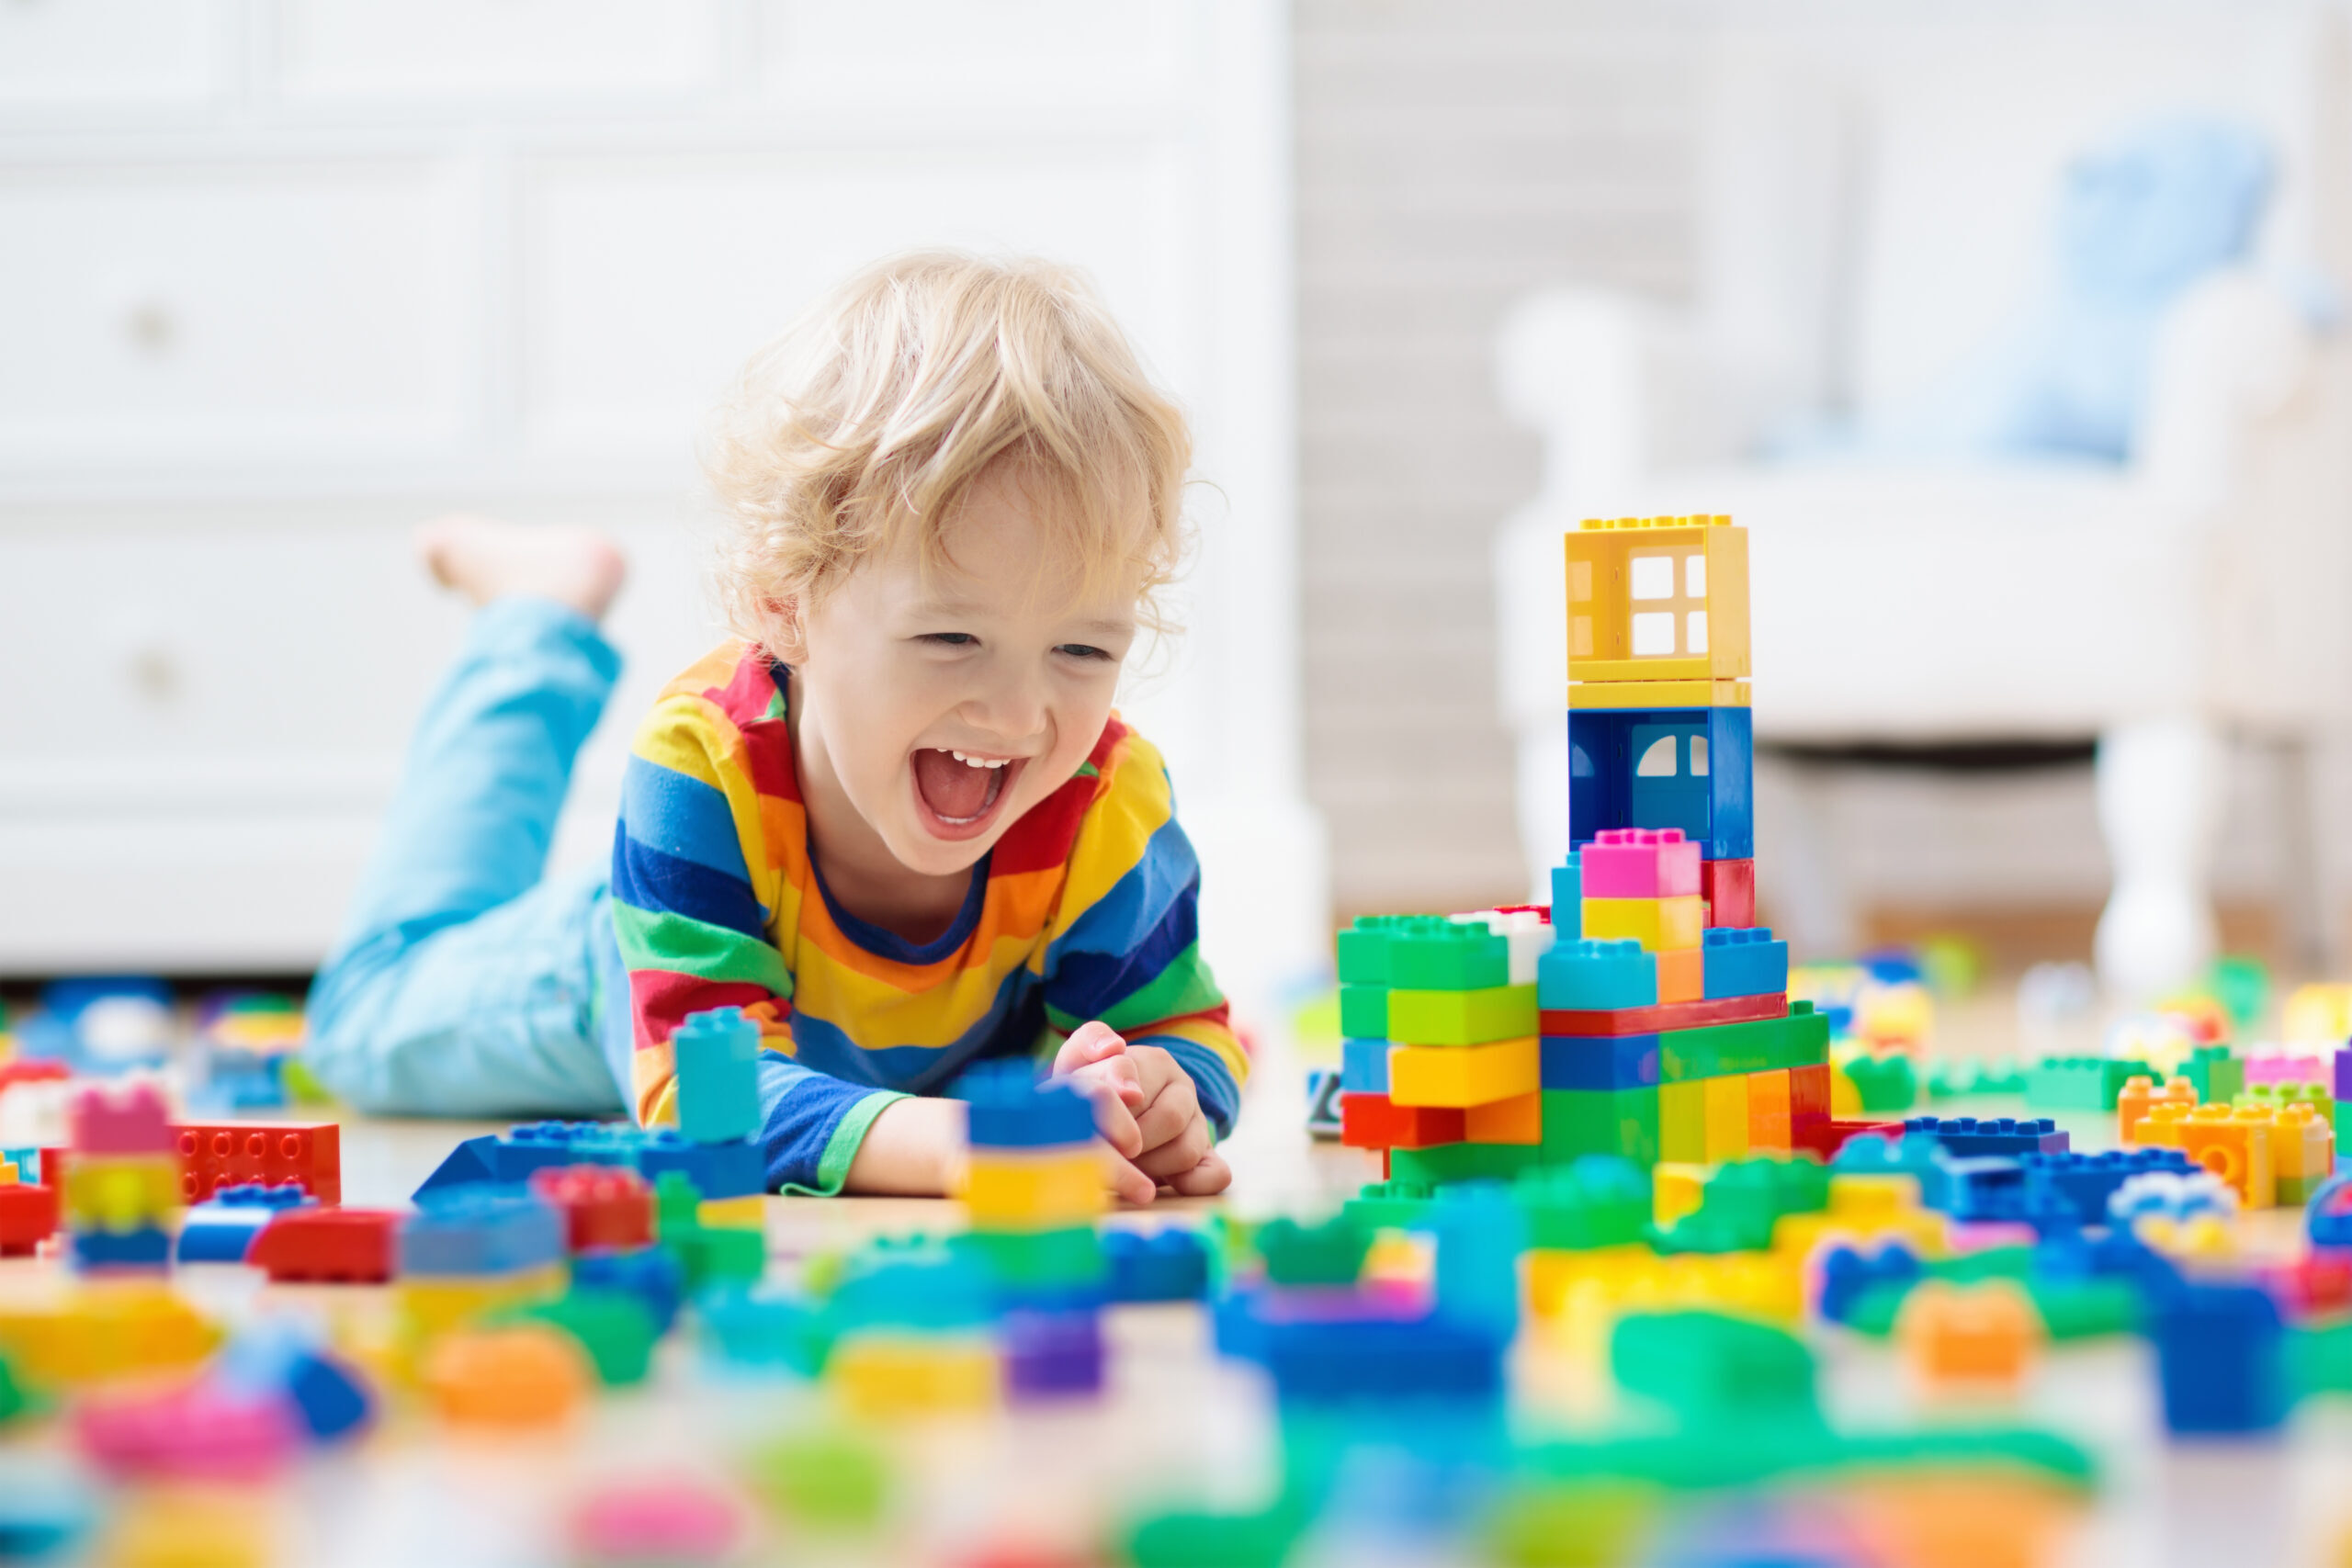 neurodevelopment services in Blackpool